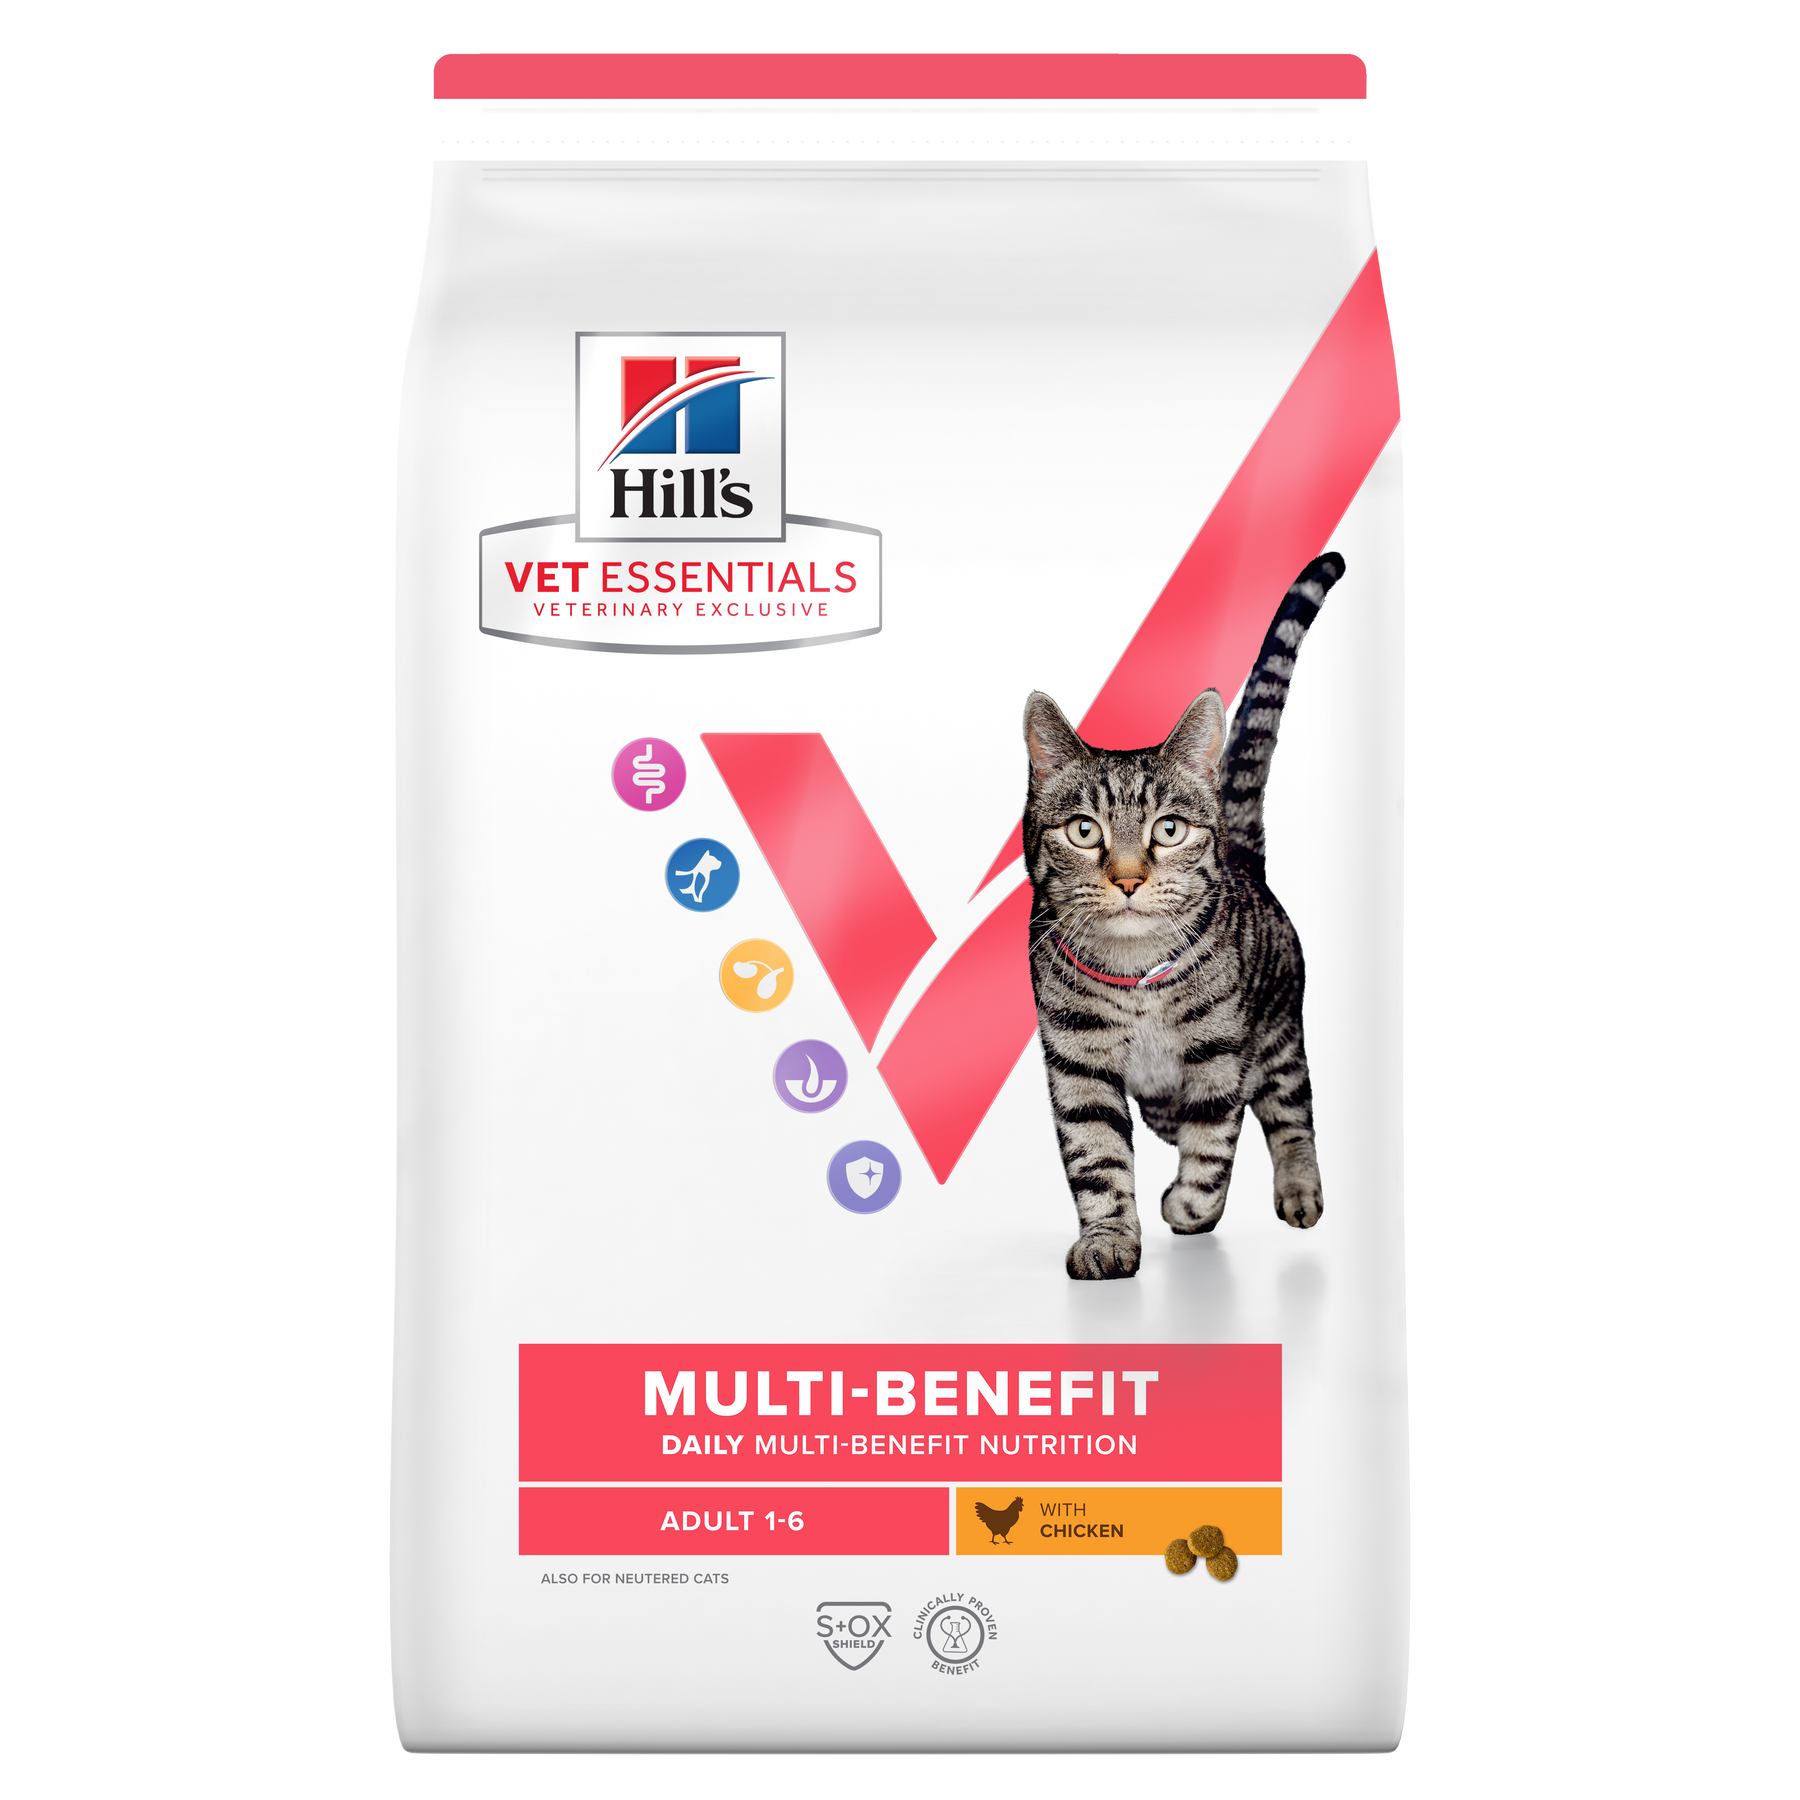 Hill's VET ESSENTIALS MULTI-BENEFIT Adult Dry Cat Food with Chicken